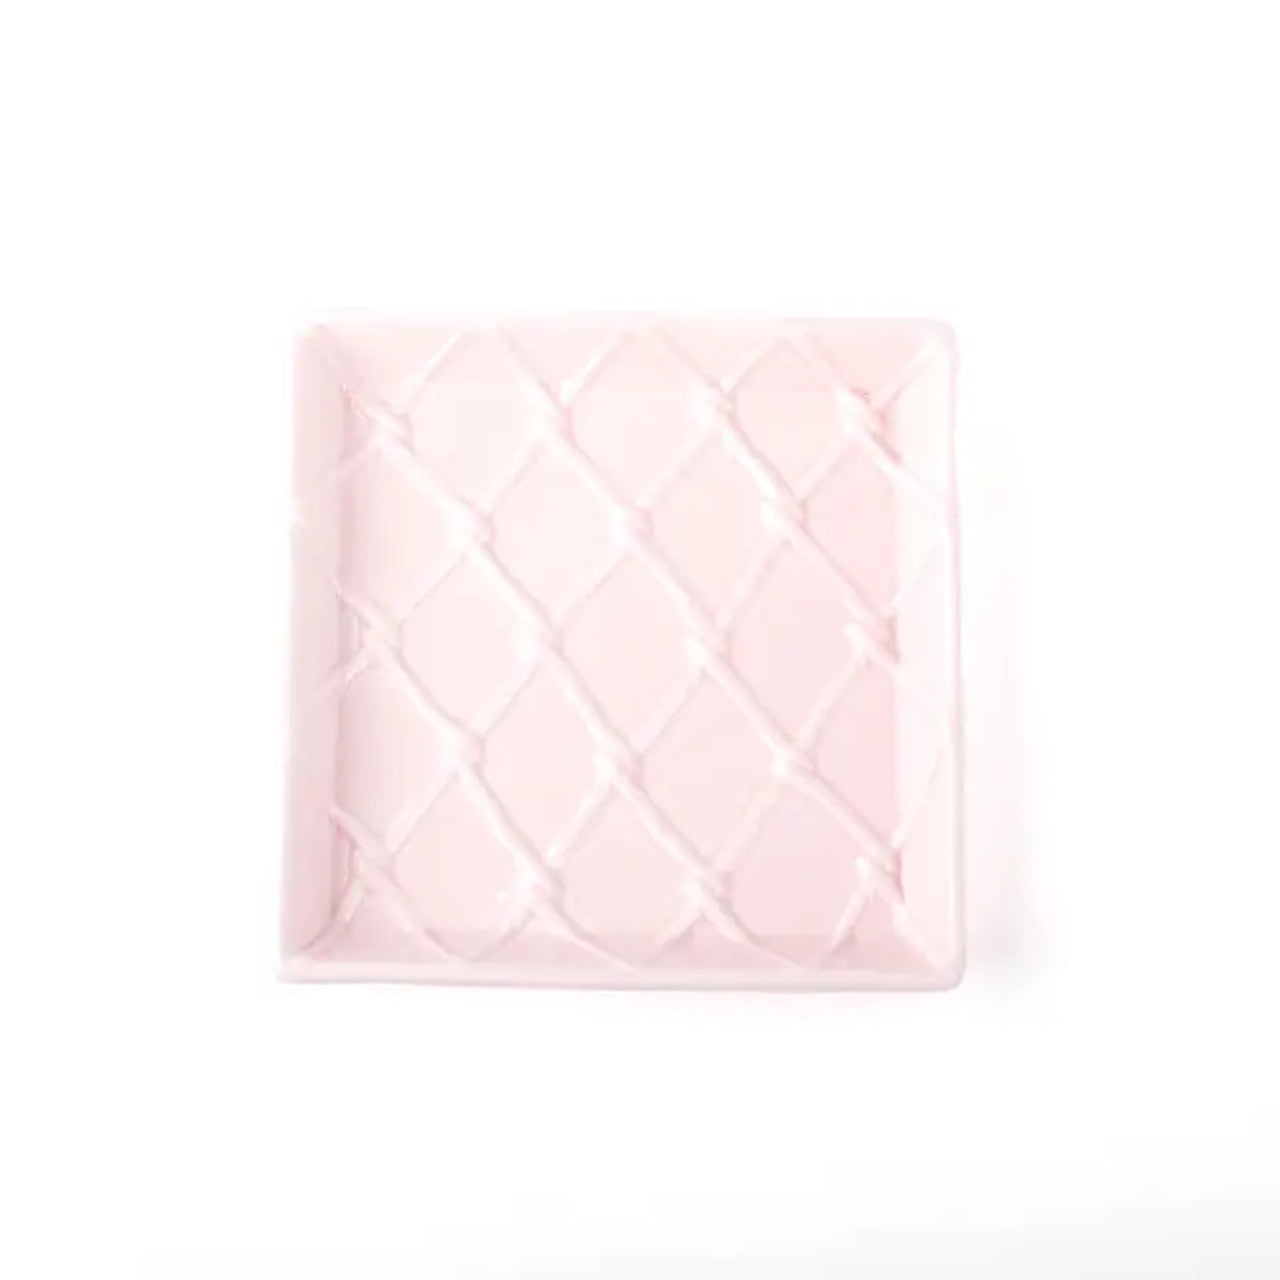 Pink Textured Cocktail Napkin Tray